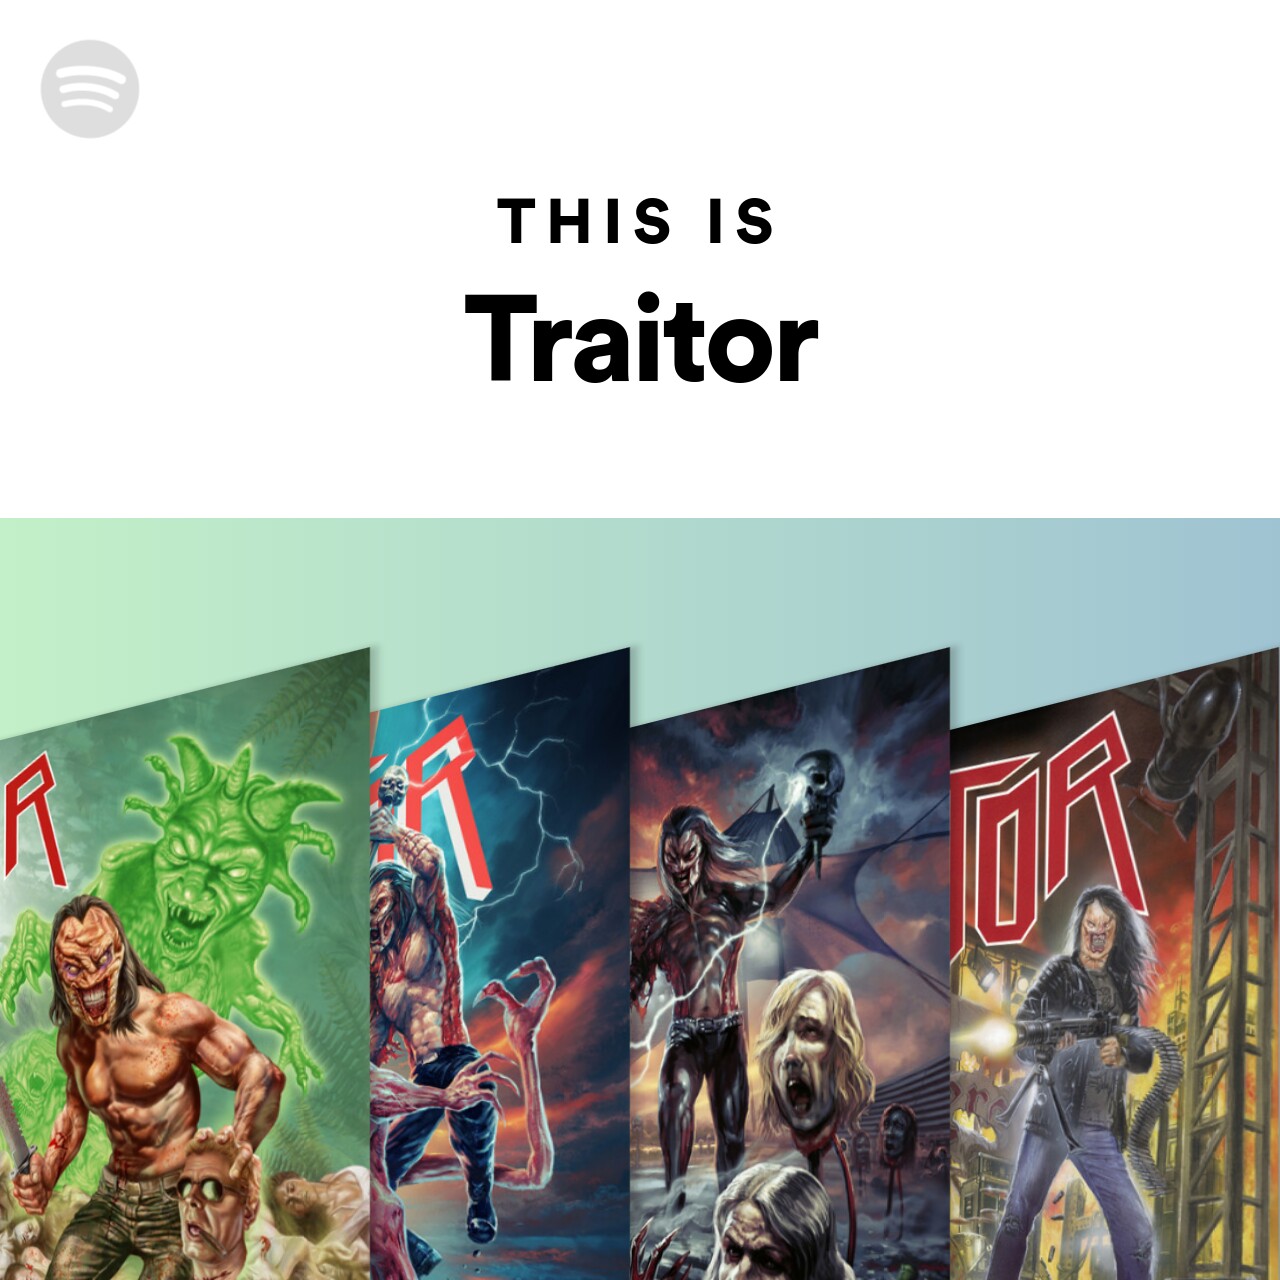 This Is Traitor